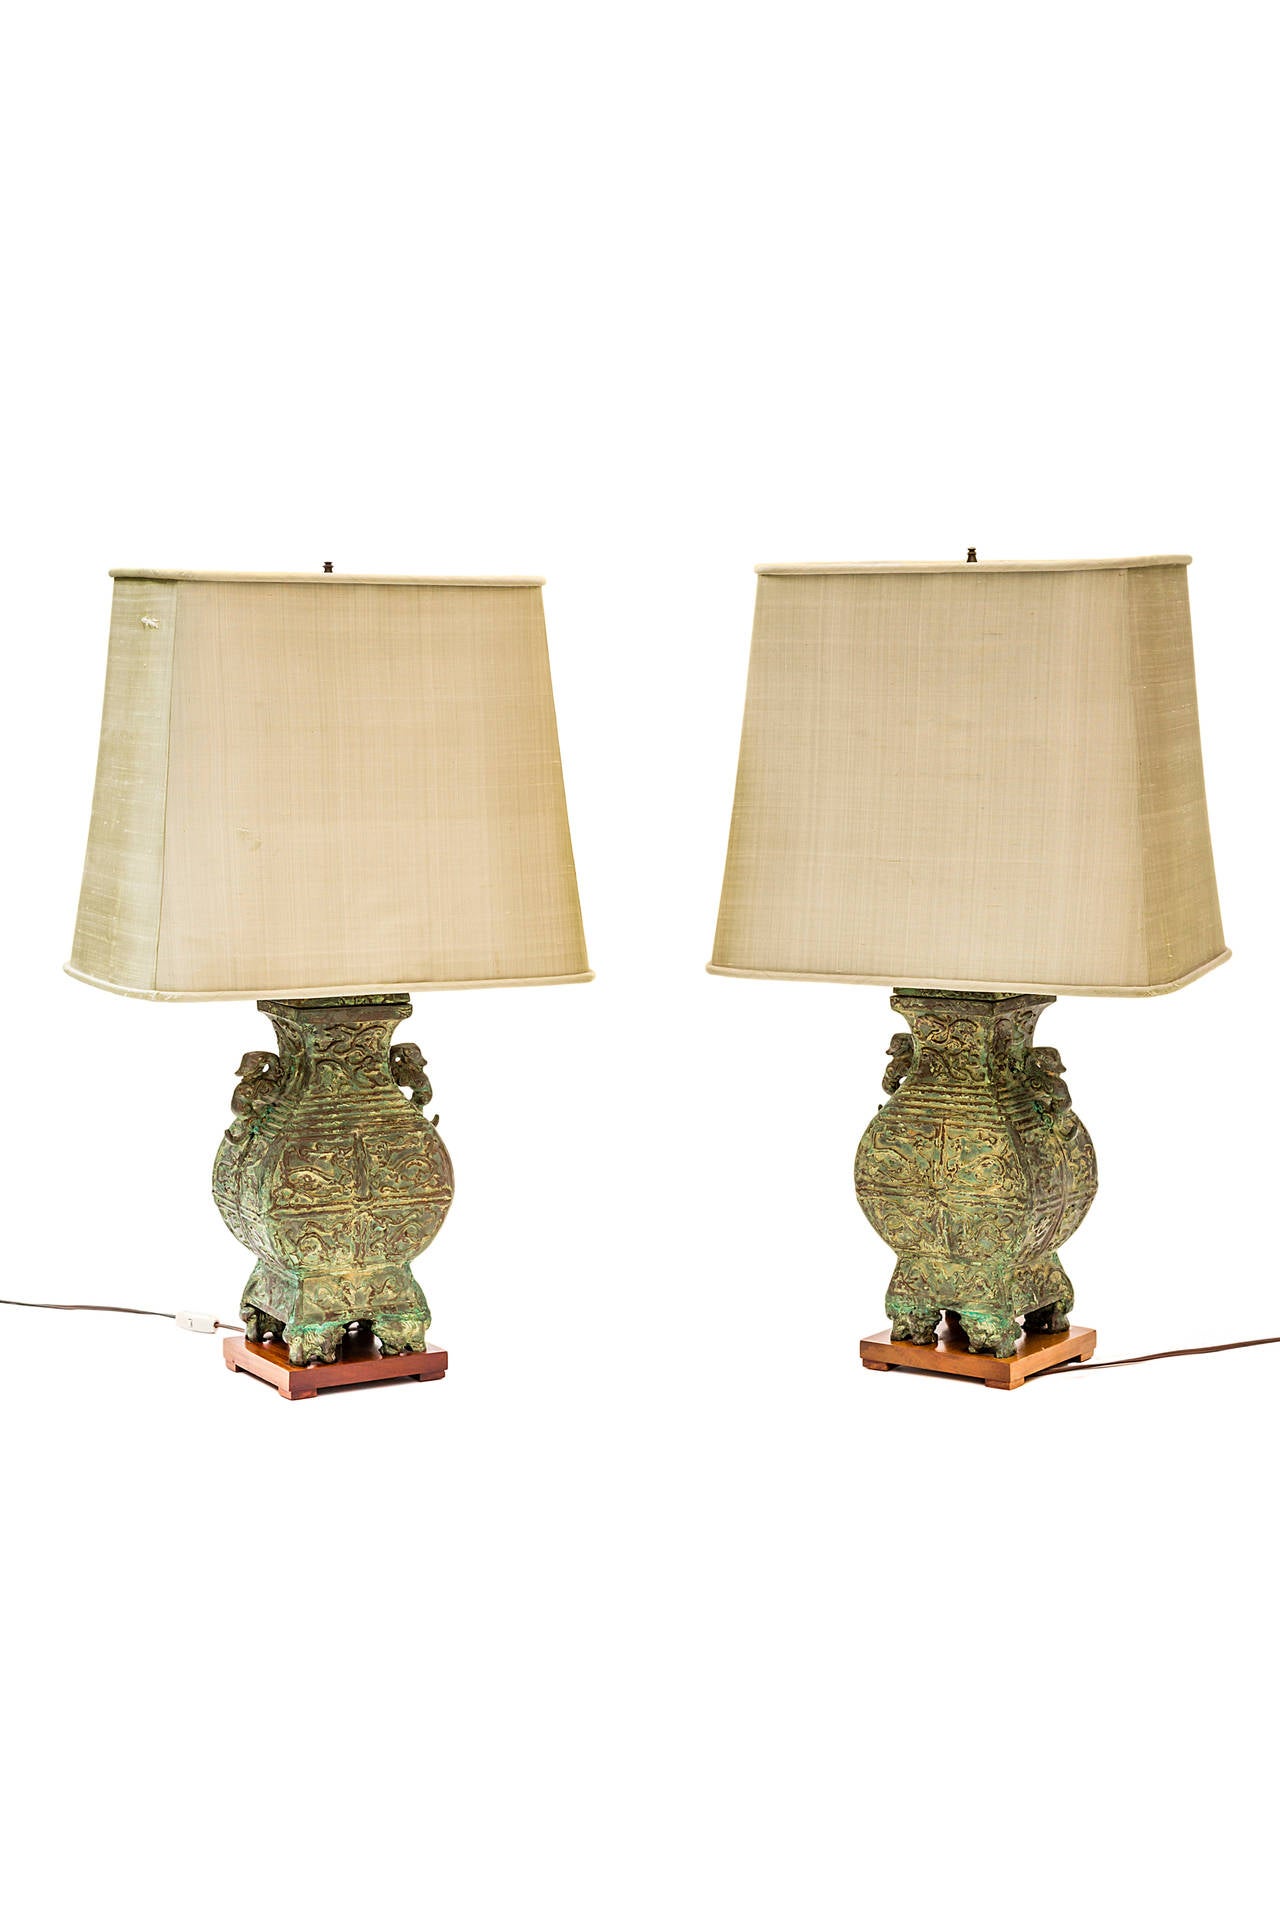 Pair of lamps
1970 's art deco
Bronze with green patina
wooden base
original lampshade in light green chinz
80 X 20 X 14
1500 euros